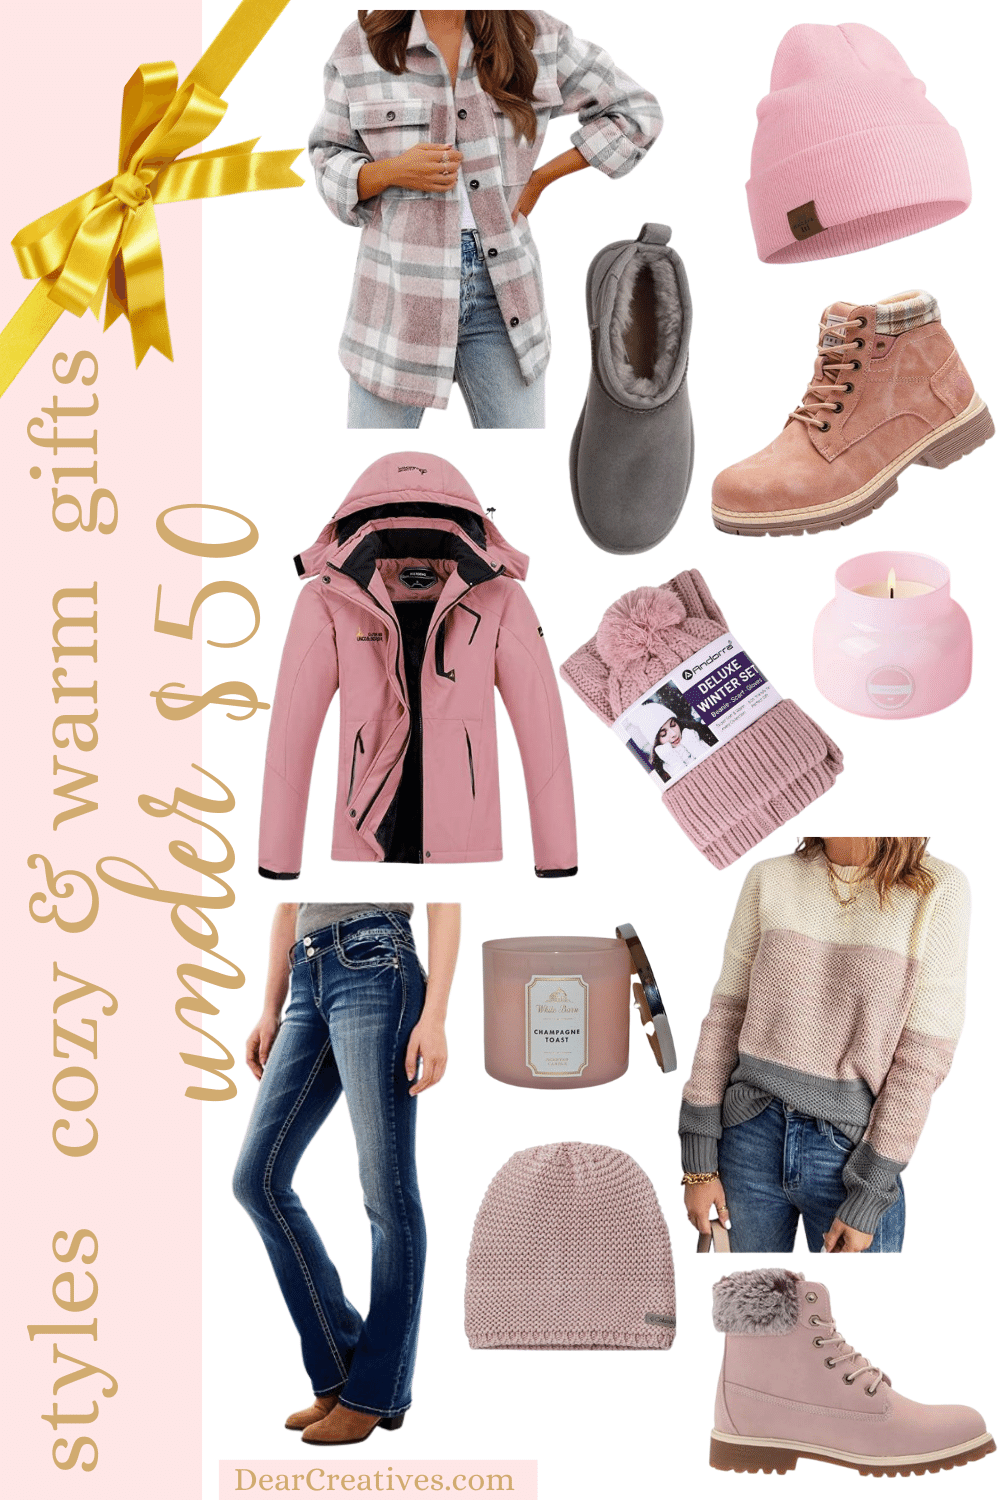 Cozy Gifts For Her – Amazon Gift Ideas Under $50!